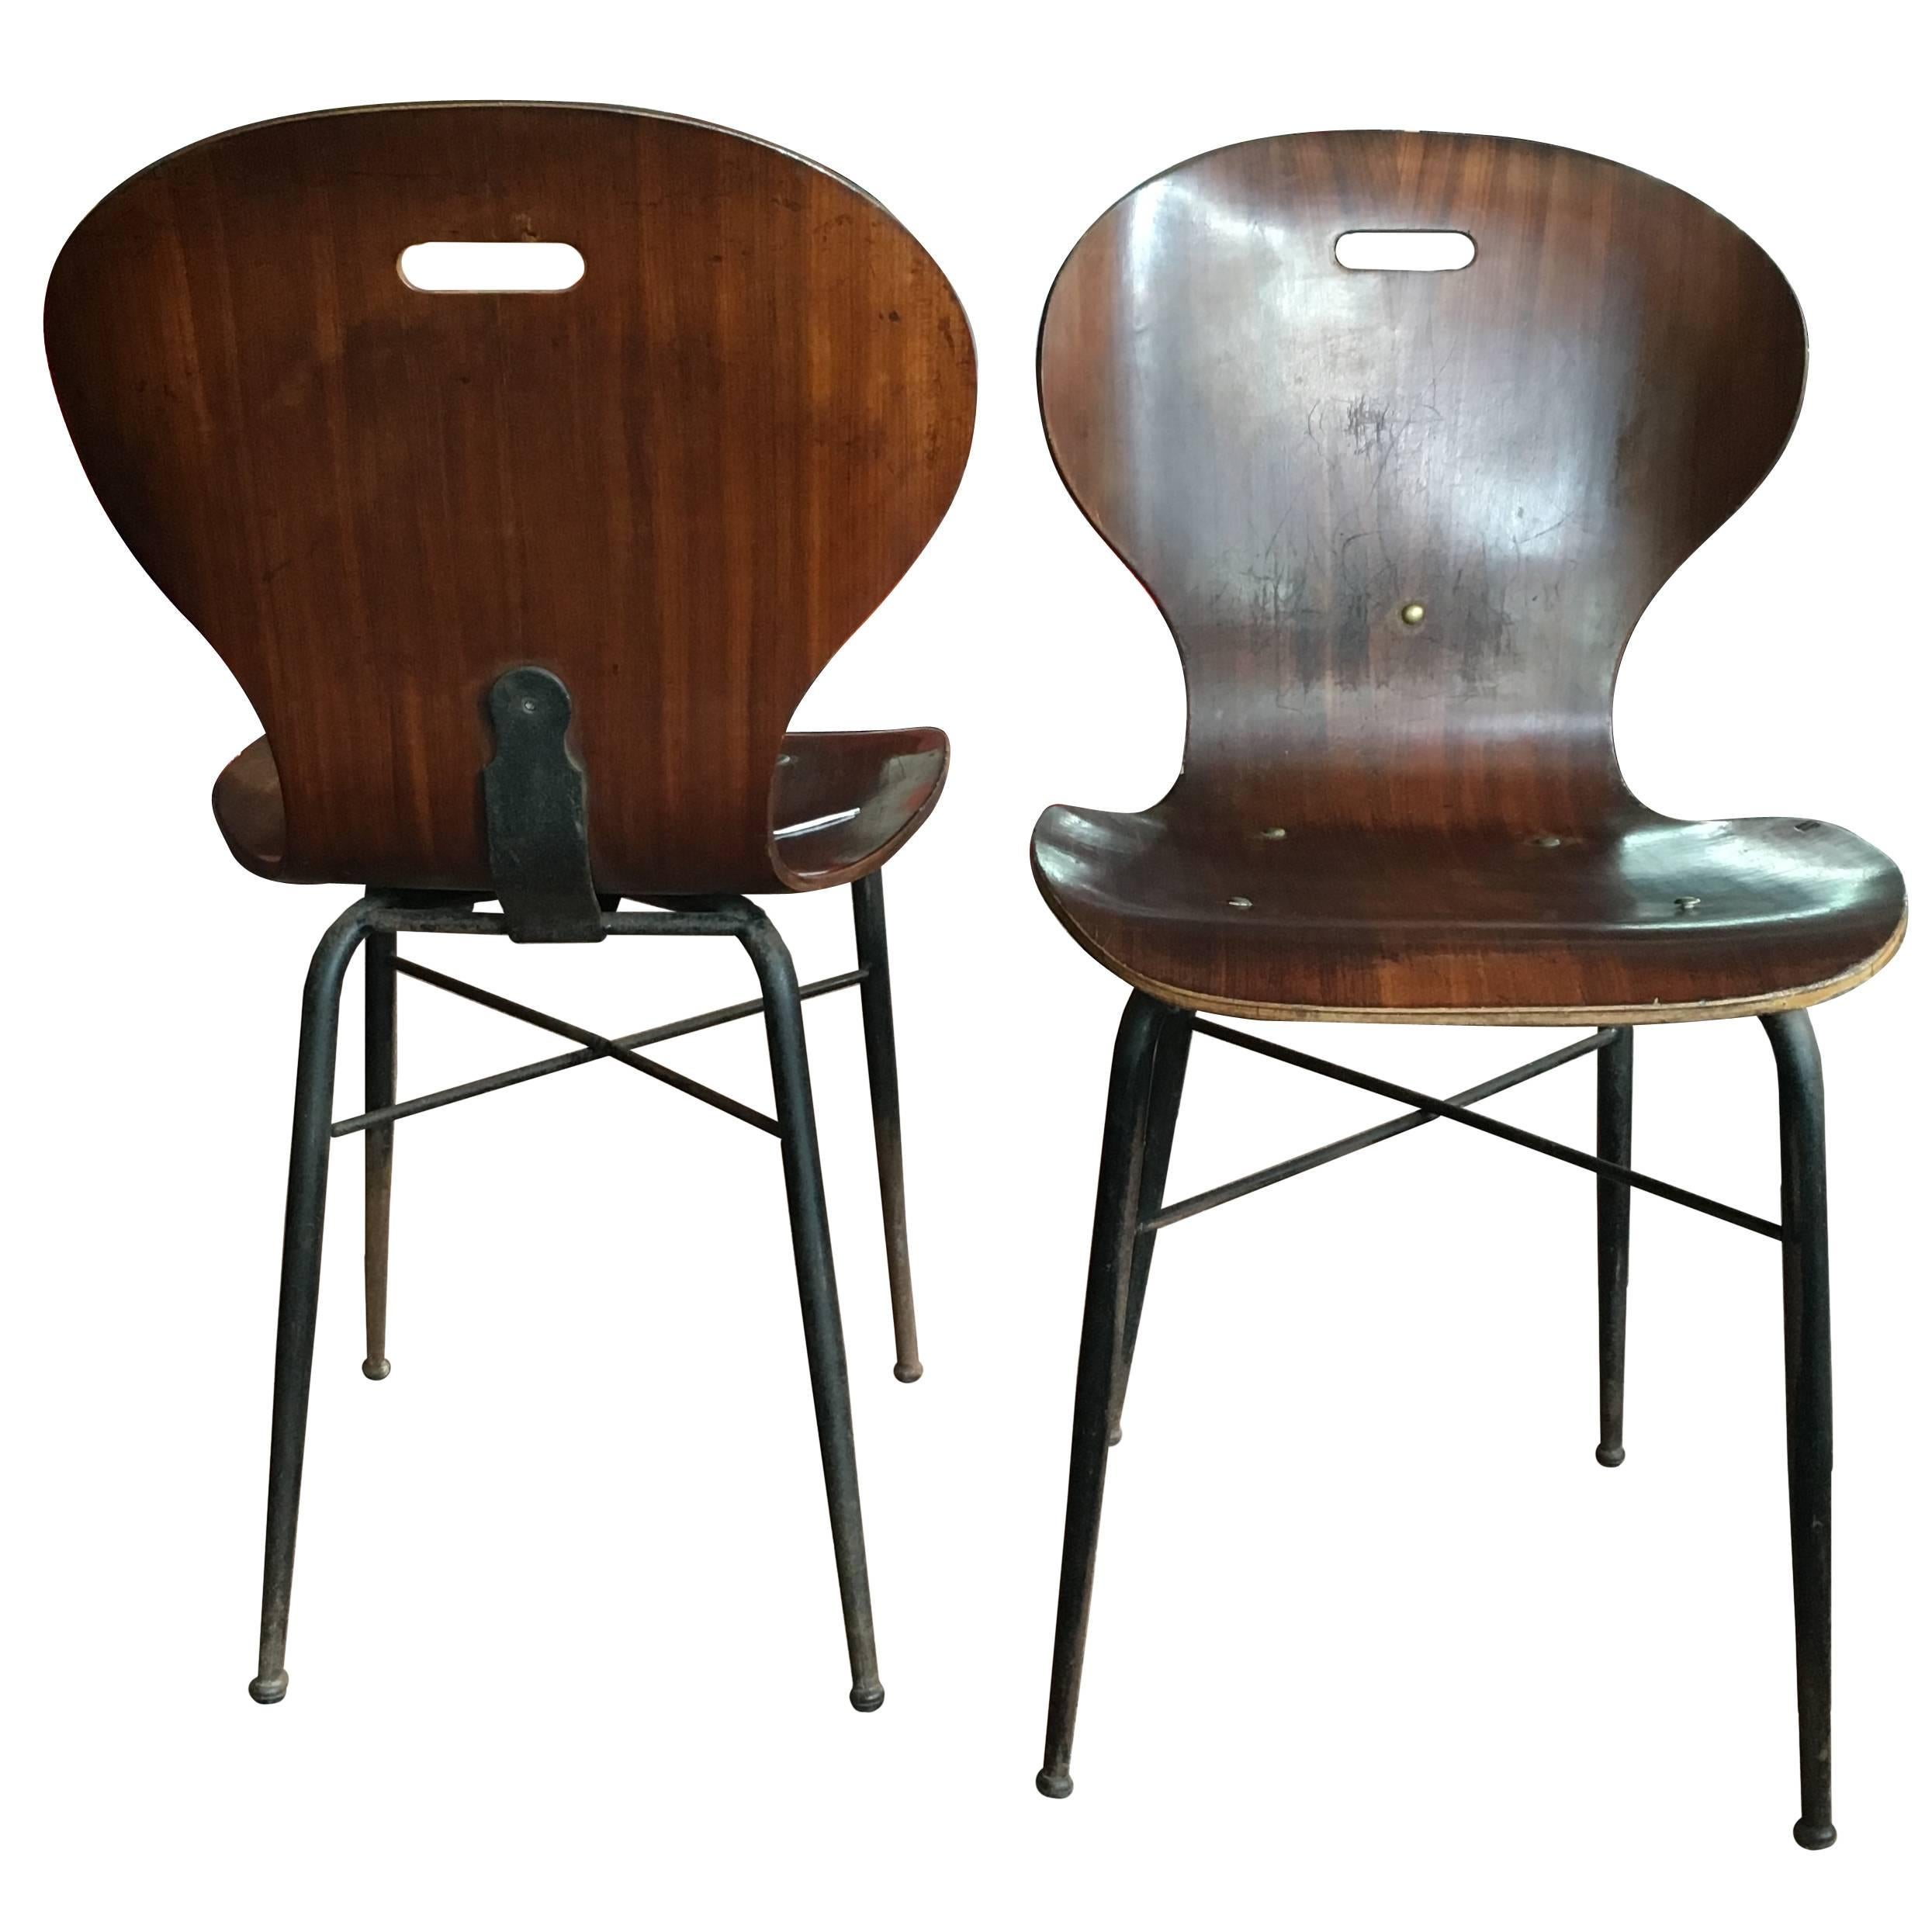 Carlo Ratti Molded Plywood Dining Chairs, 16 available For Sale